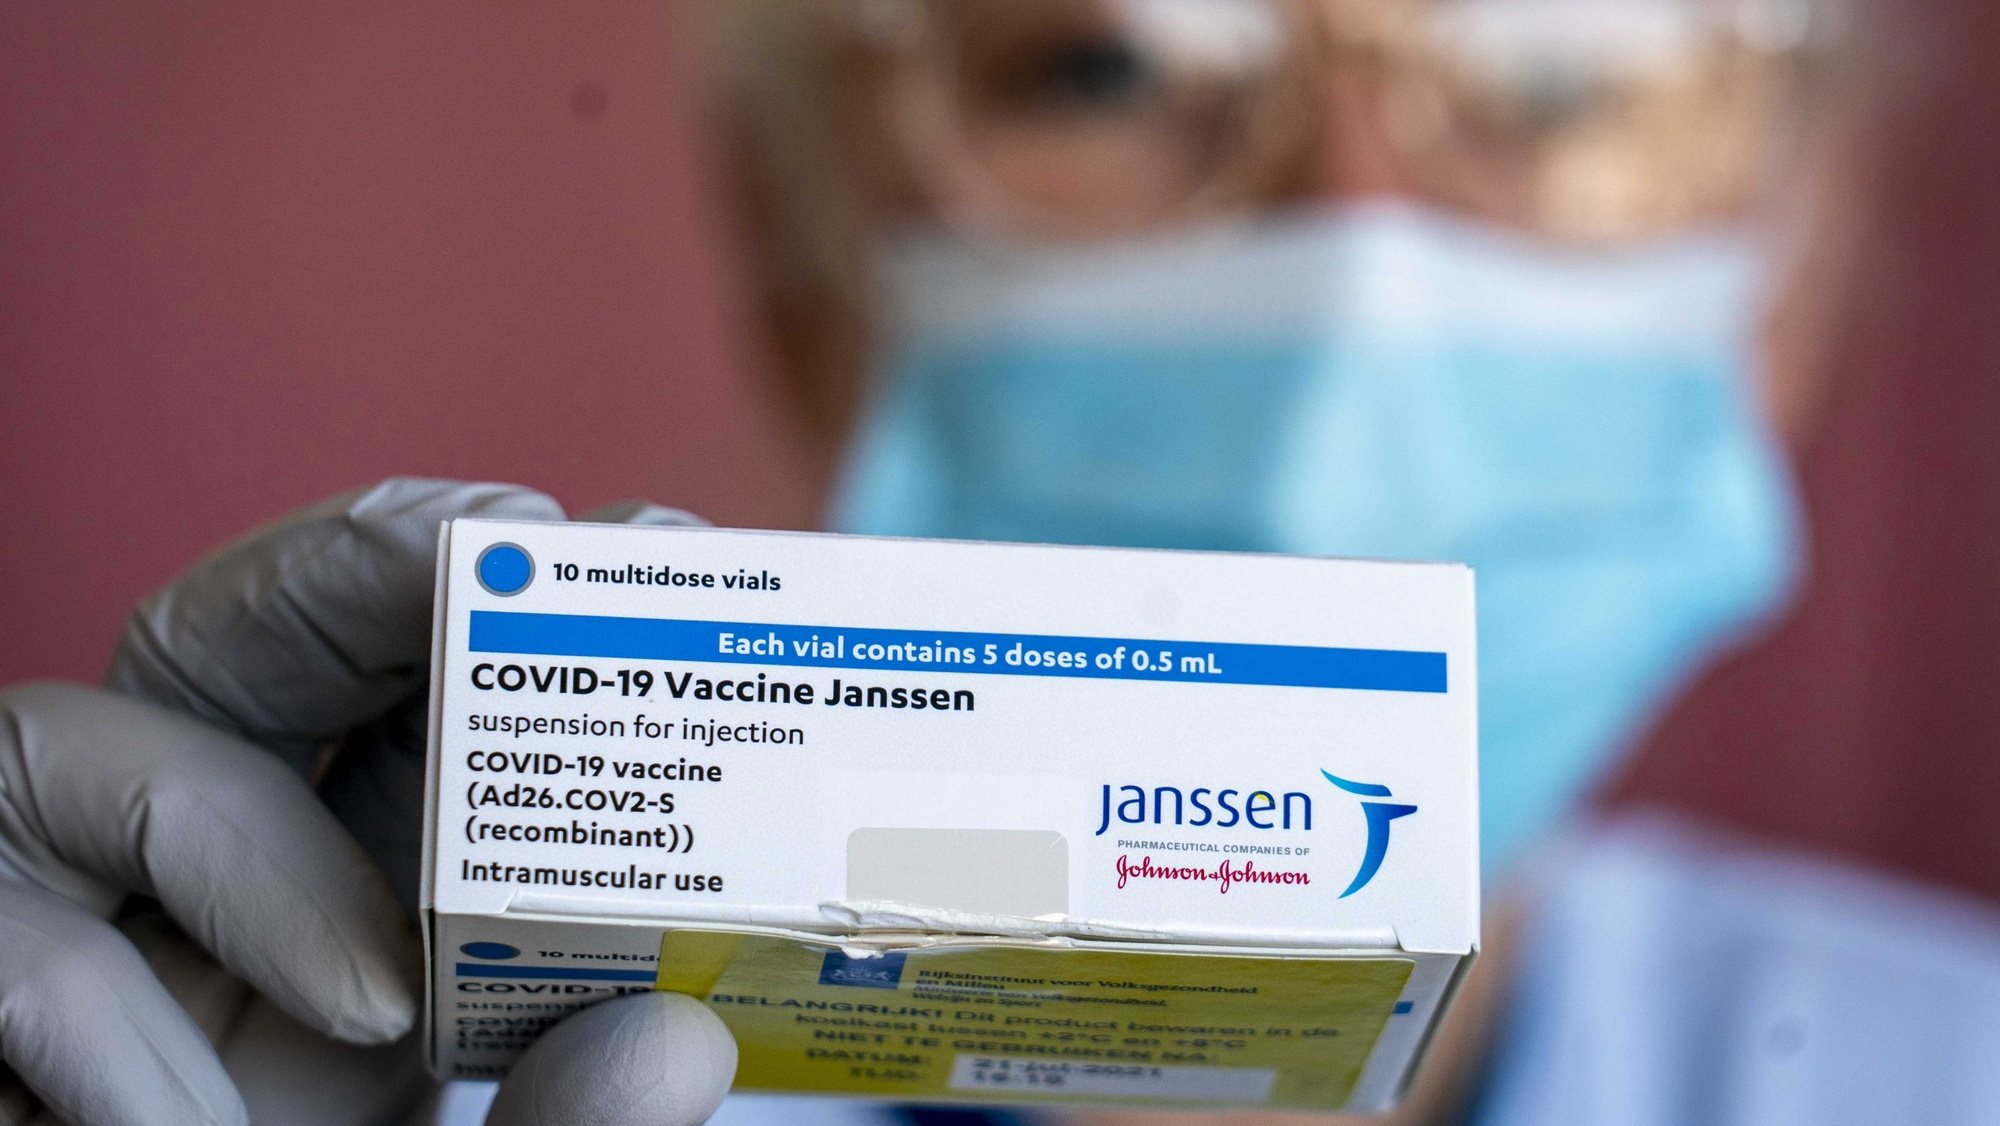 epa09162316 The Janssen vaccine is being prepared before hospital staff are vaccinated at HMC Westeinde, in the Hague, Netherlands, 26 April 2021. Almost half of the first batch of Janssen vaccines is intended for hospital staff who are in direct contact with patients.  EPA/JERRY LAMPEN